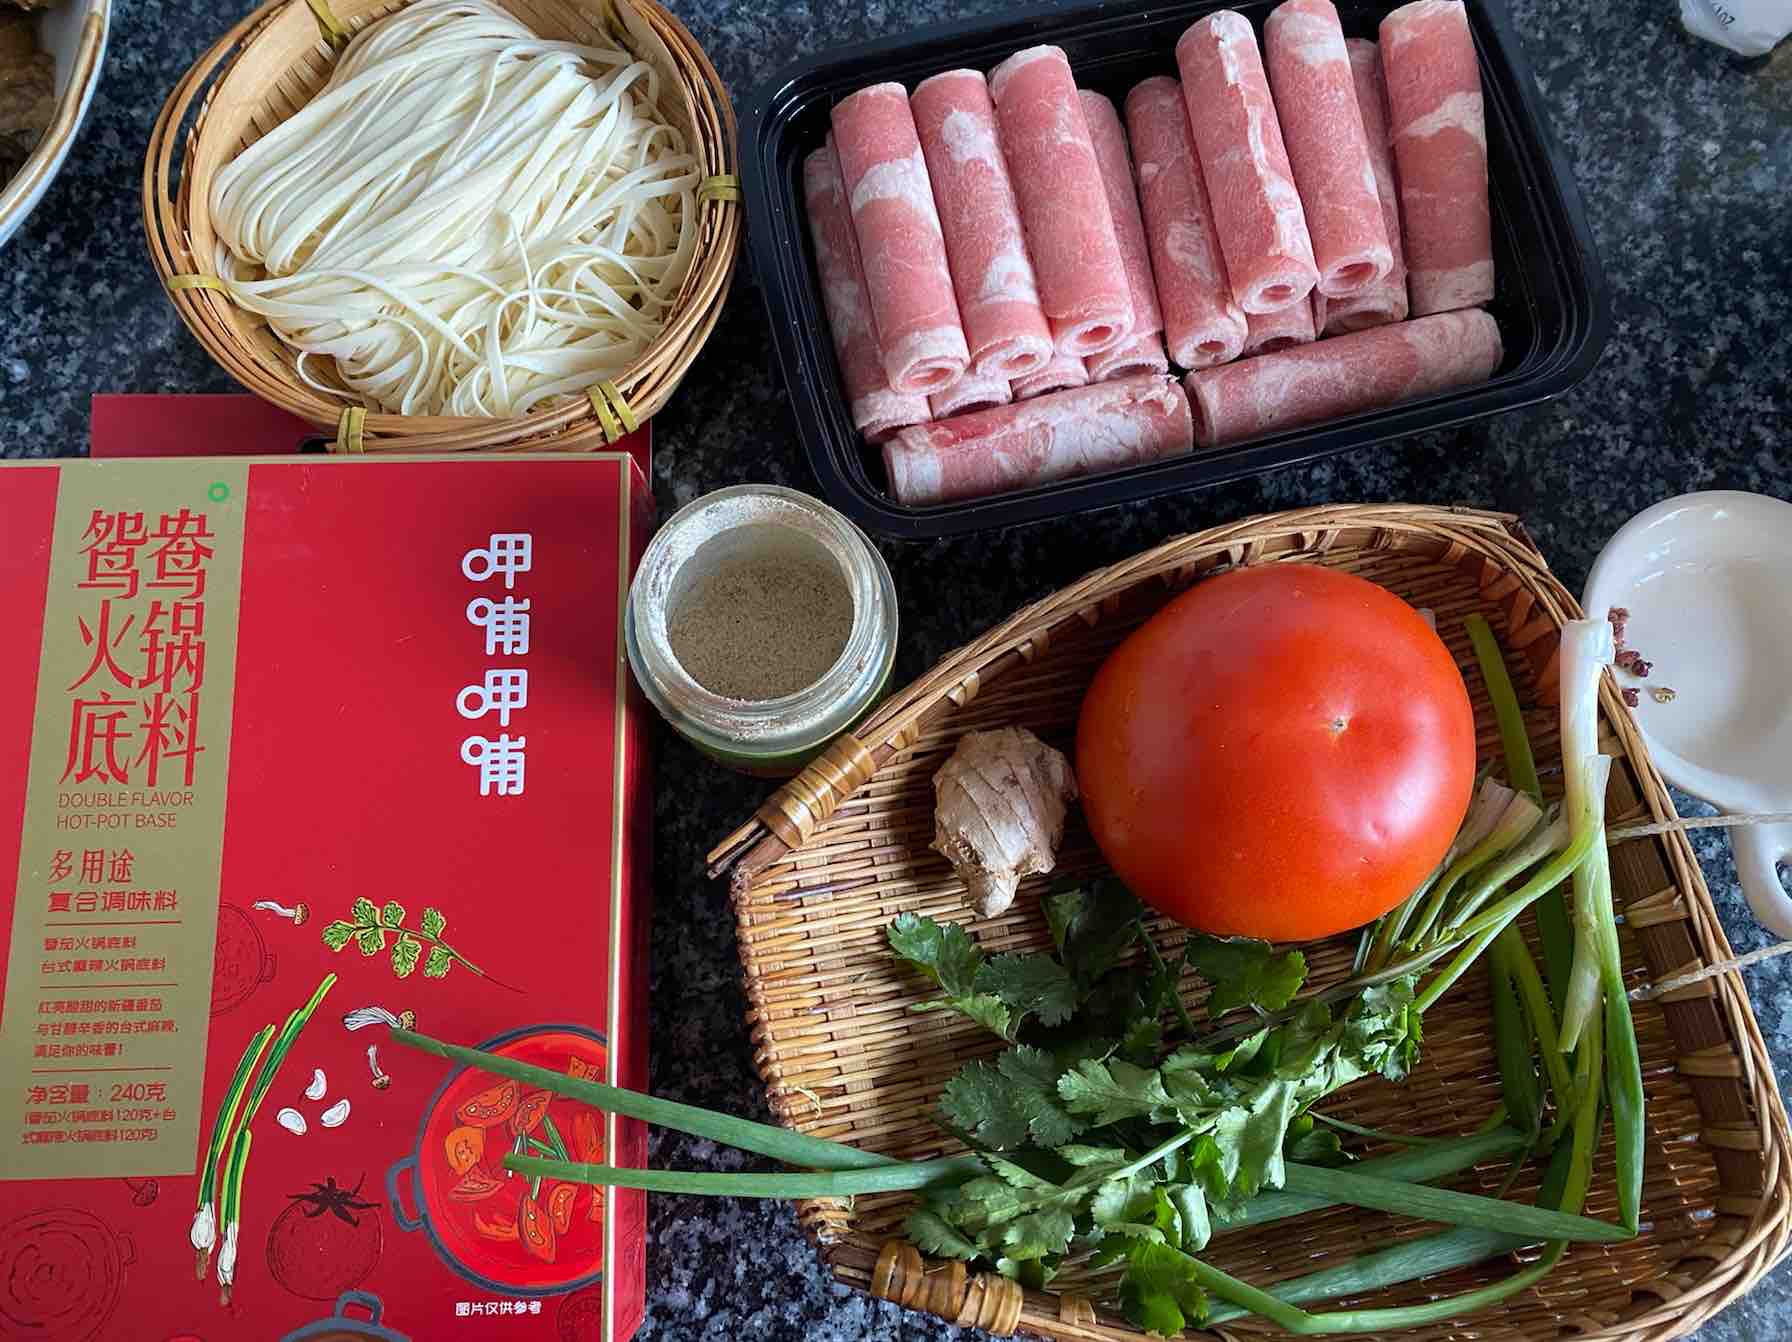 Beef Noodles with Tomato recipe